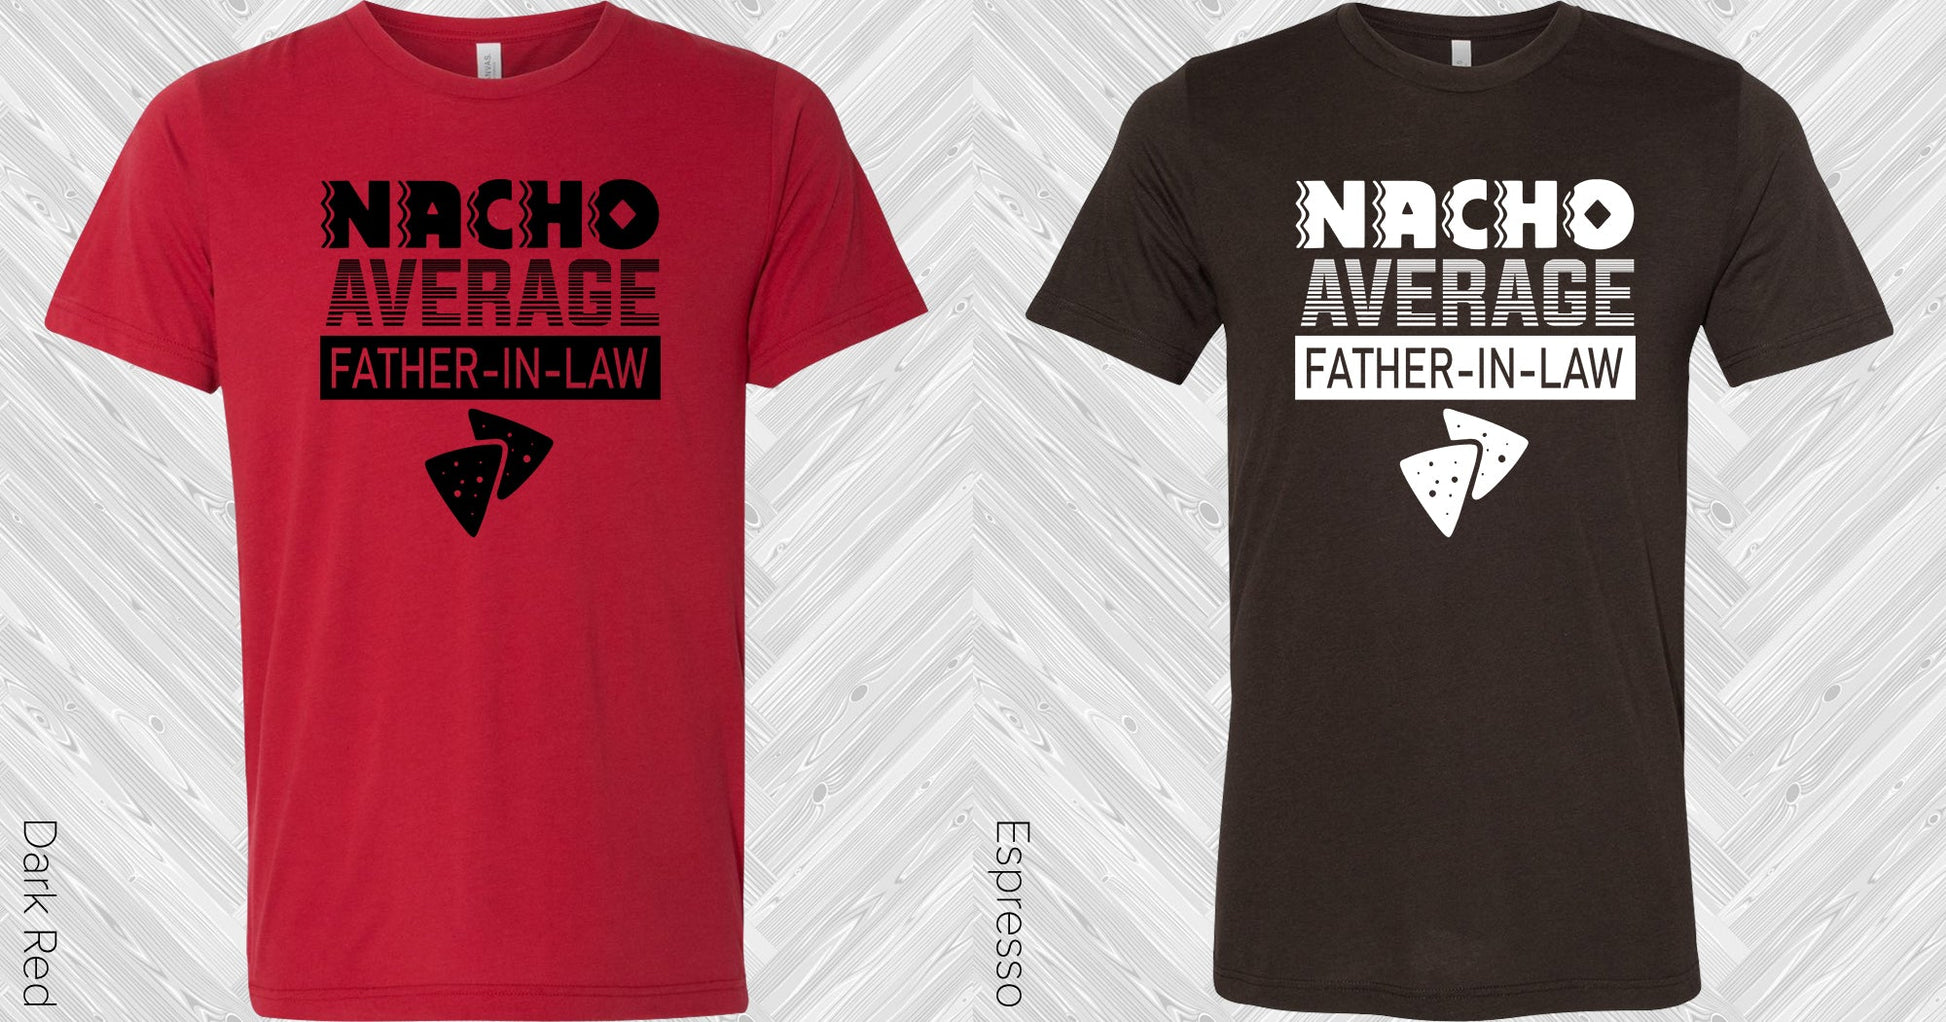 Nacho Average Father-In-Law Graphic Tee Graphic Tee